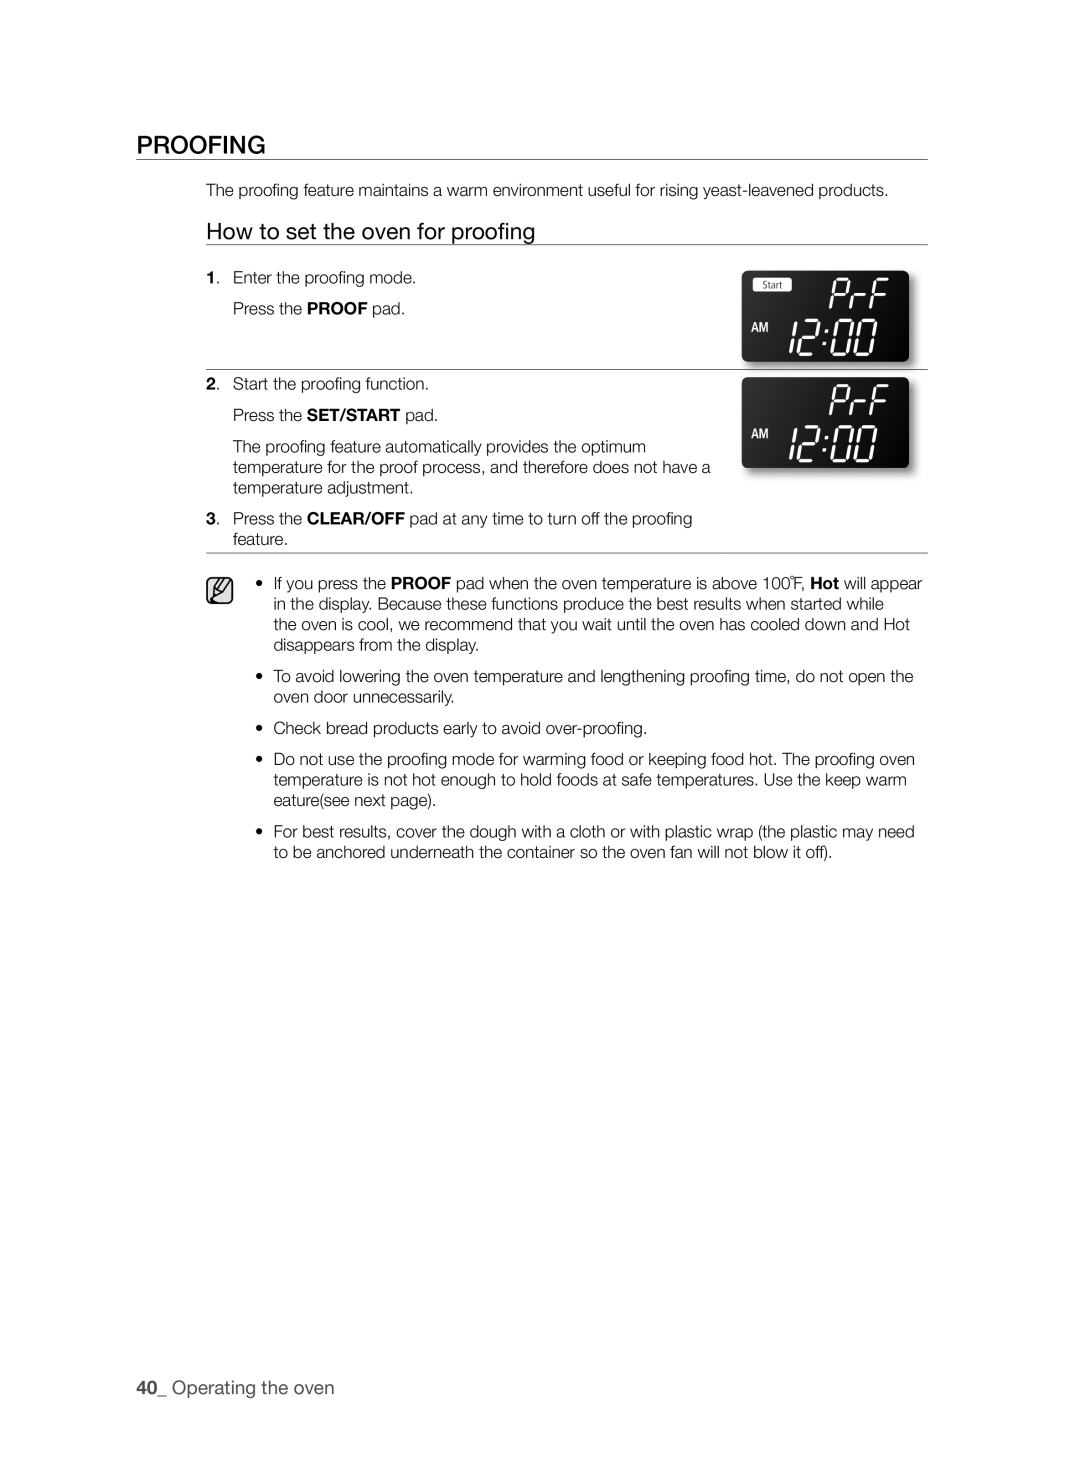 Samsung FE-R500WW user manual Proofing, How to set the oven for proofing, Operating the oven 